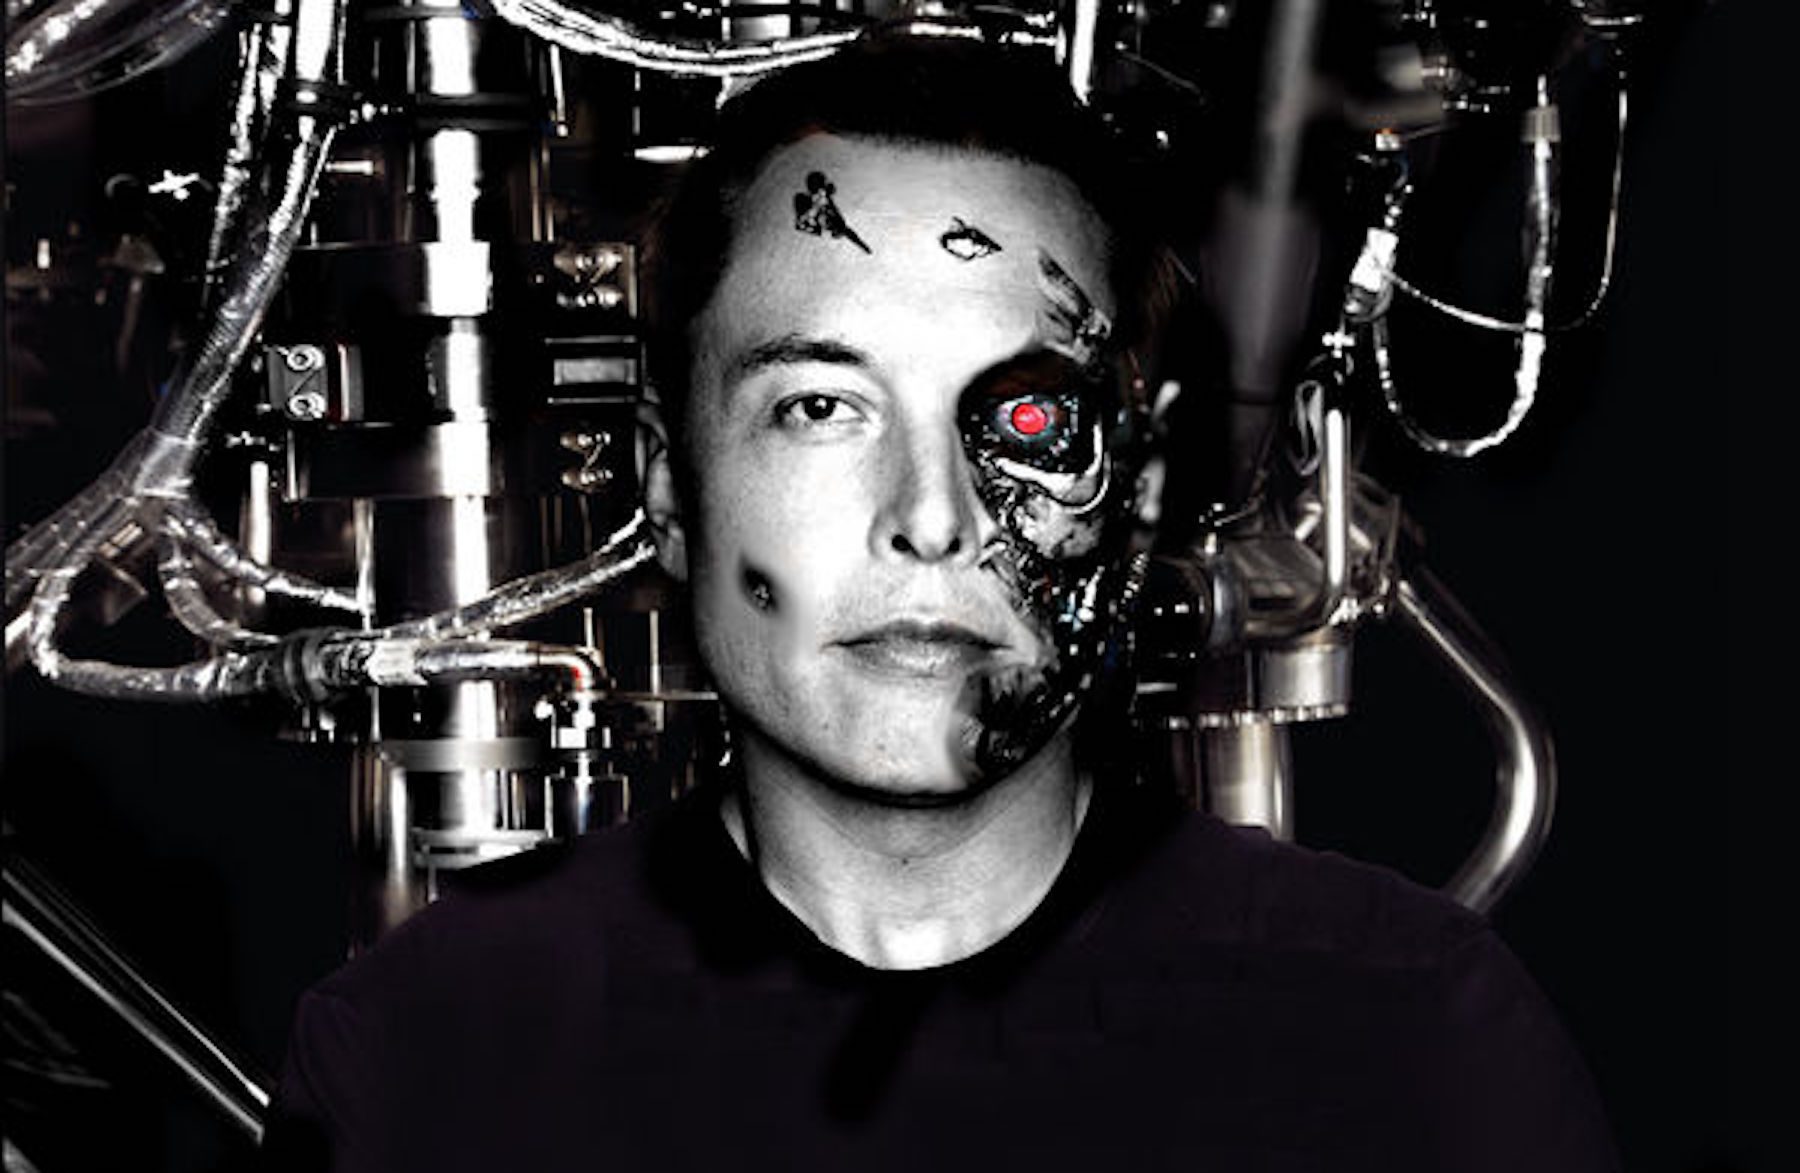 Elon Musk portrayed as a cyborg, black and white with a red robotic eye.